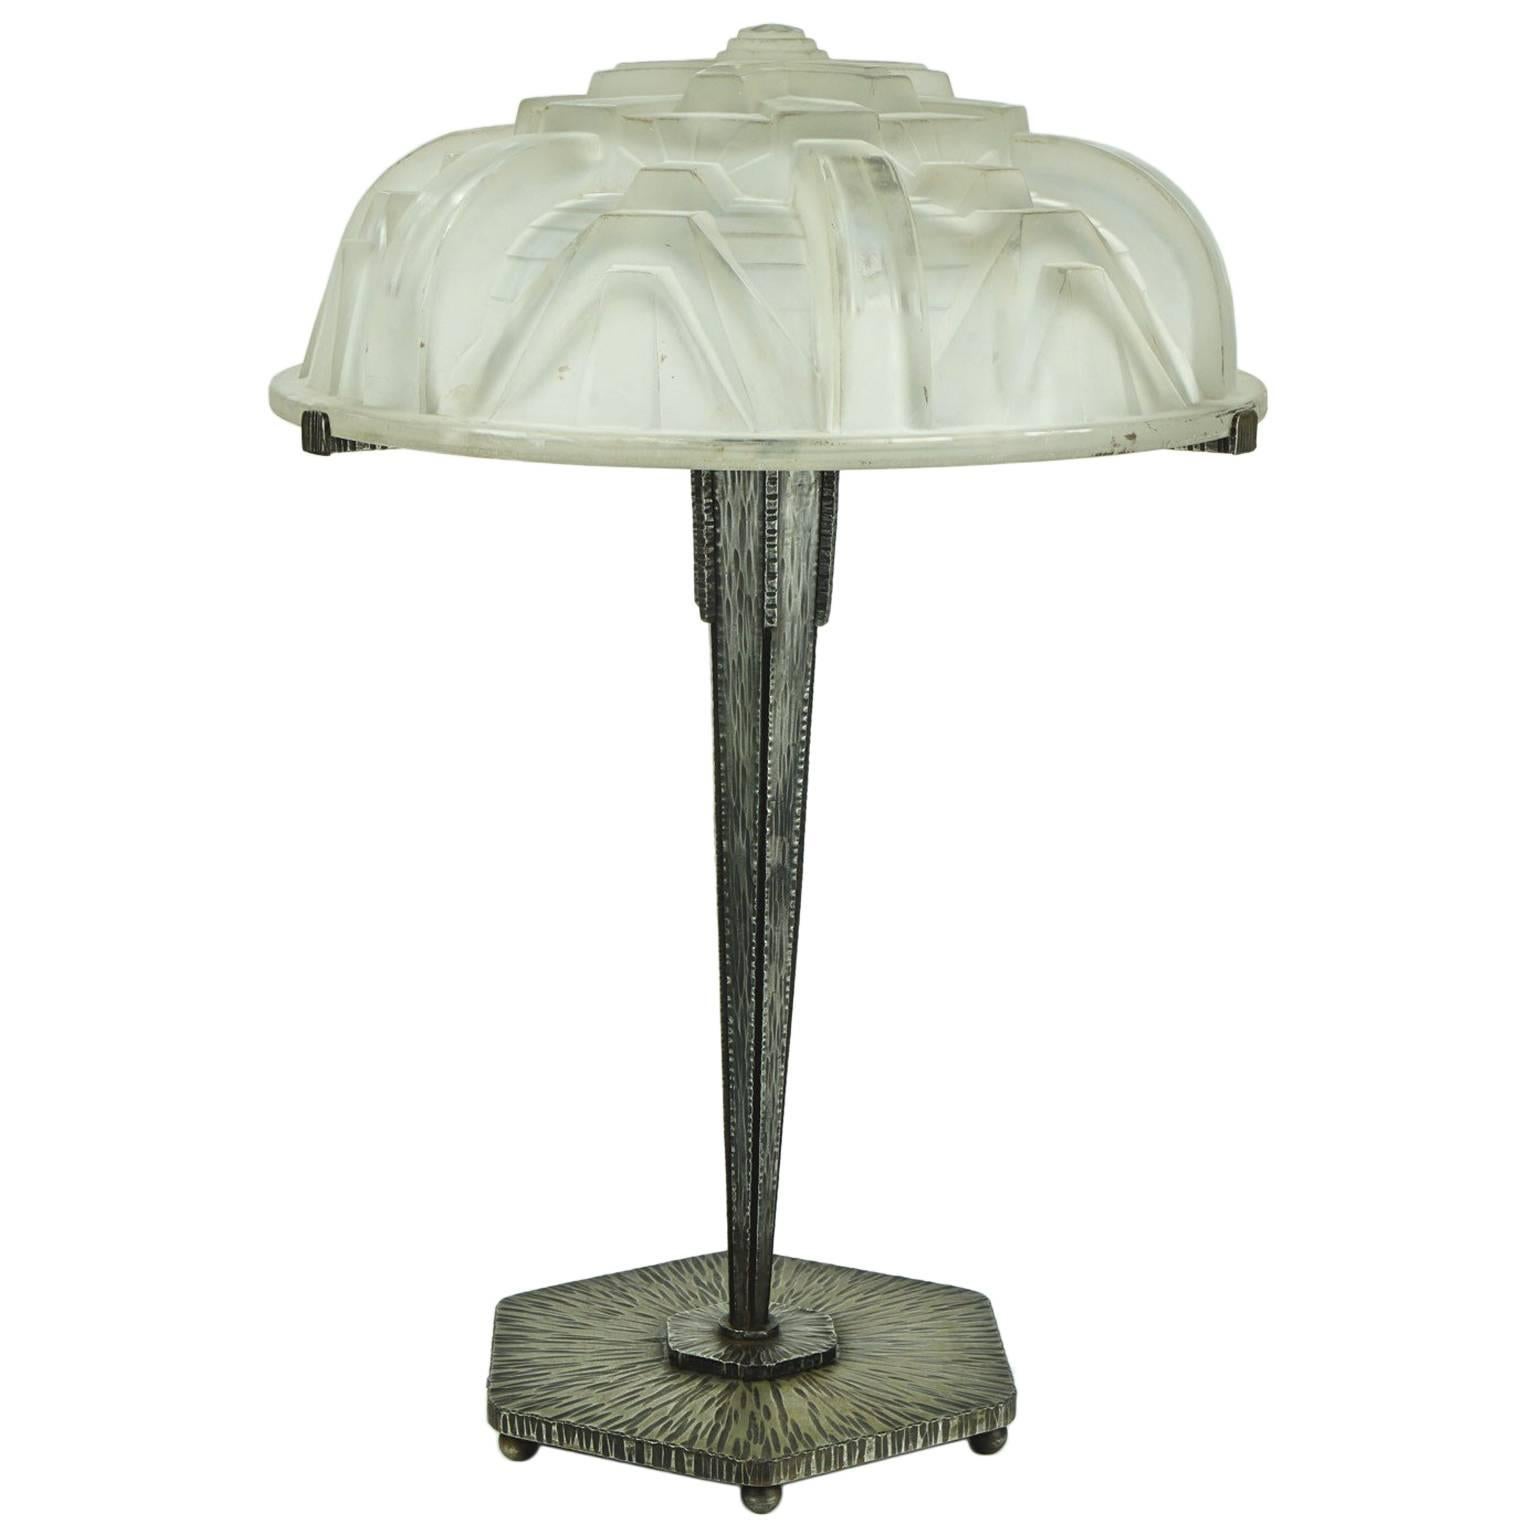 Large Art Deco Muller Freres Table Lamp with Geometric Motifs Design